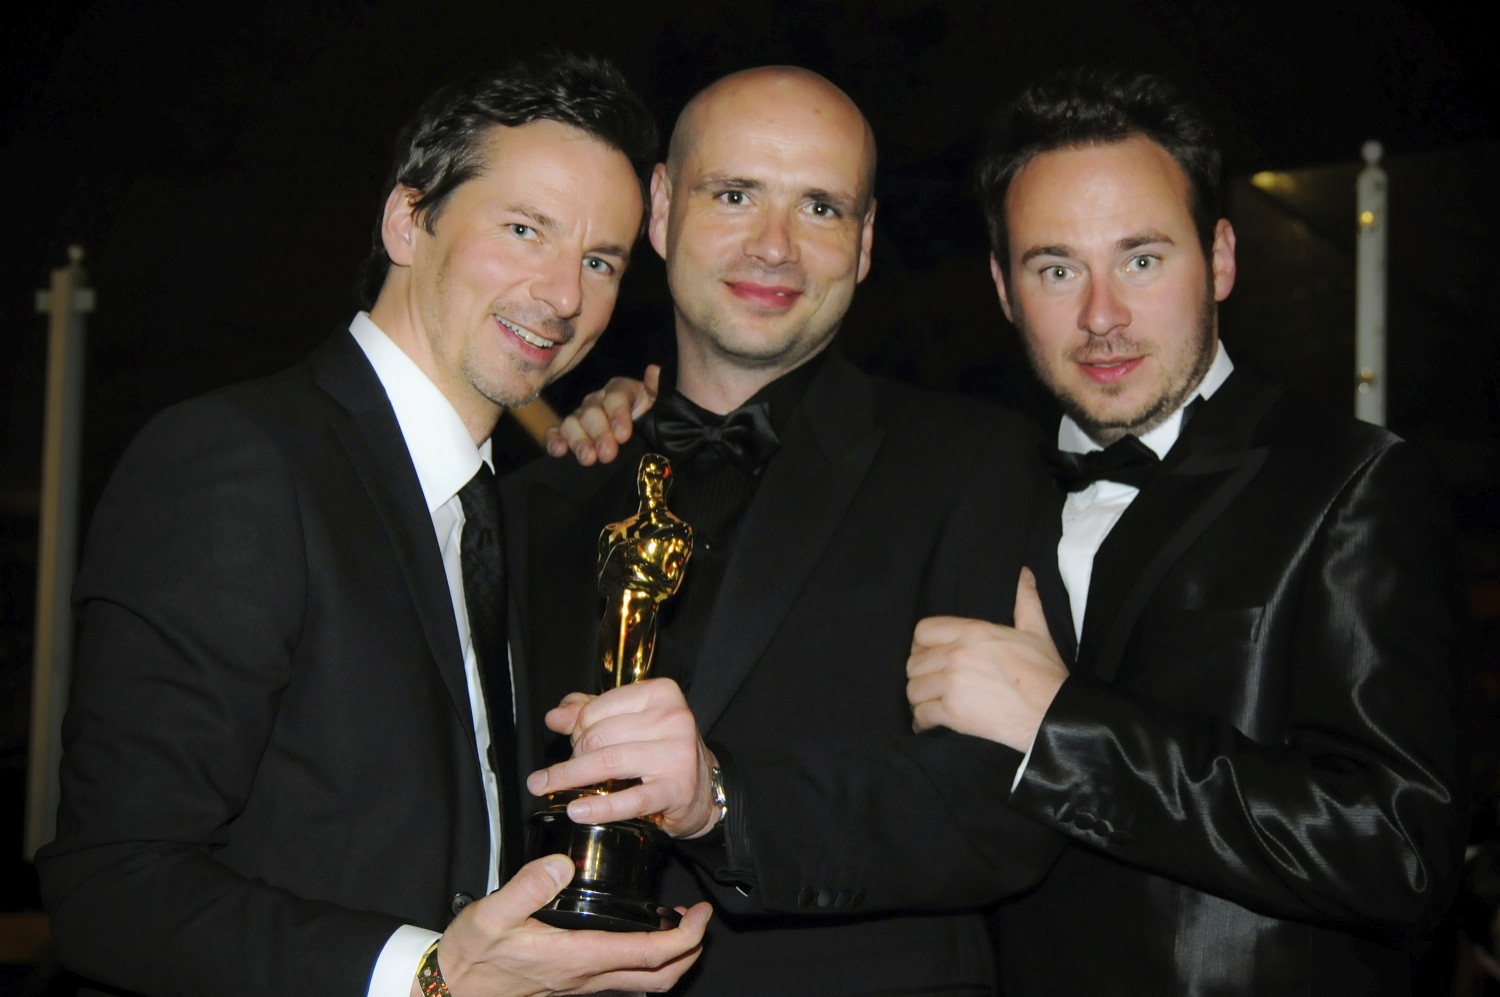 LOS ANGELES, CA - FEBRUARY 22: (L-R) Actor and producer David C. Bunners, director and producer Jochen Freydank, screenwriter Johann A. Bunners at the 81st Annual Academy Awards held at Kodak Theatre on February 22, 2009